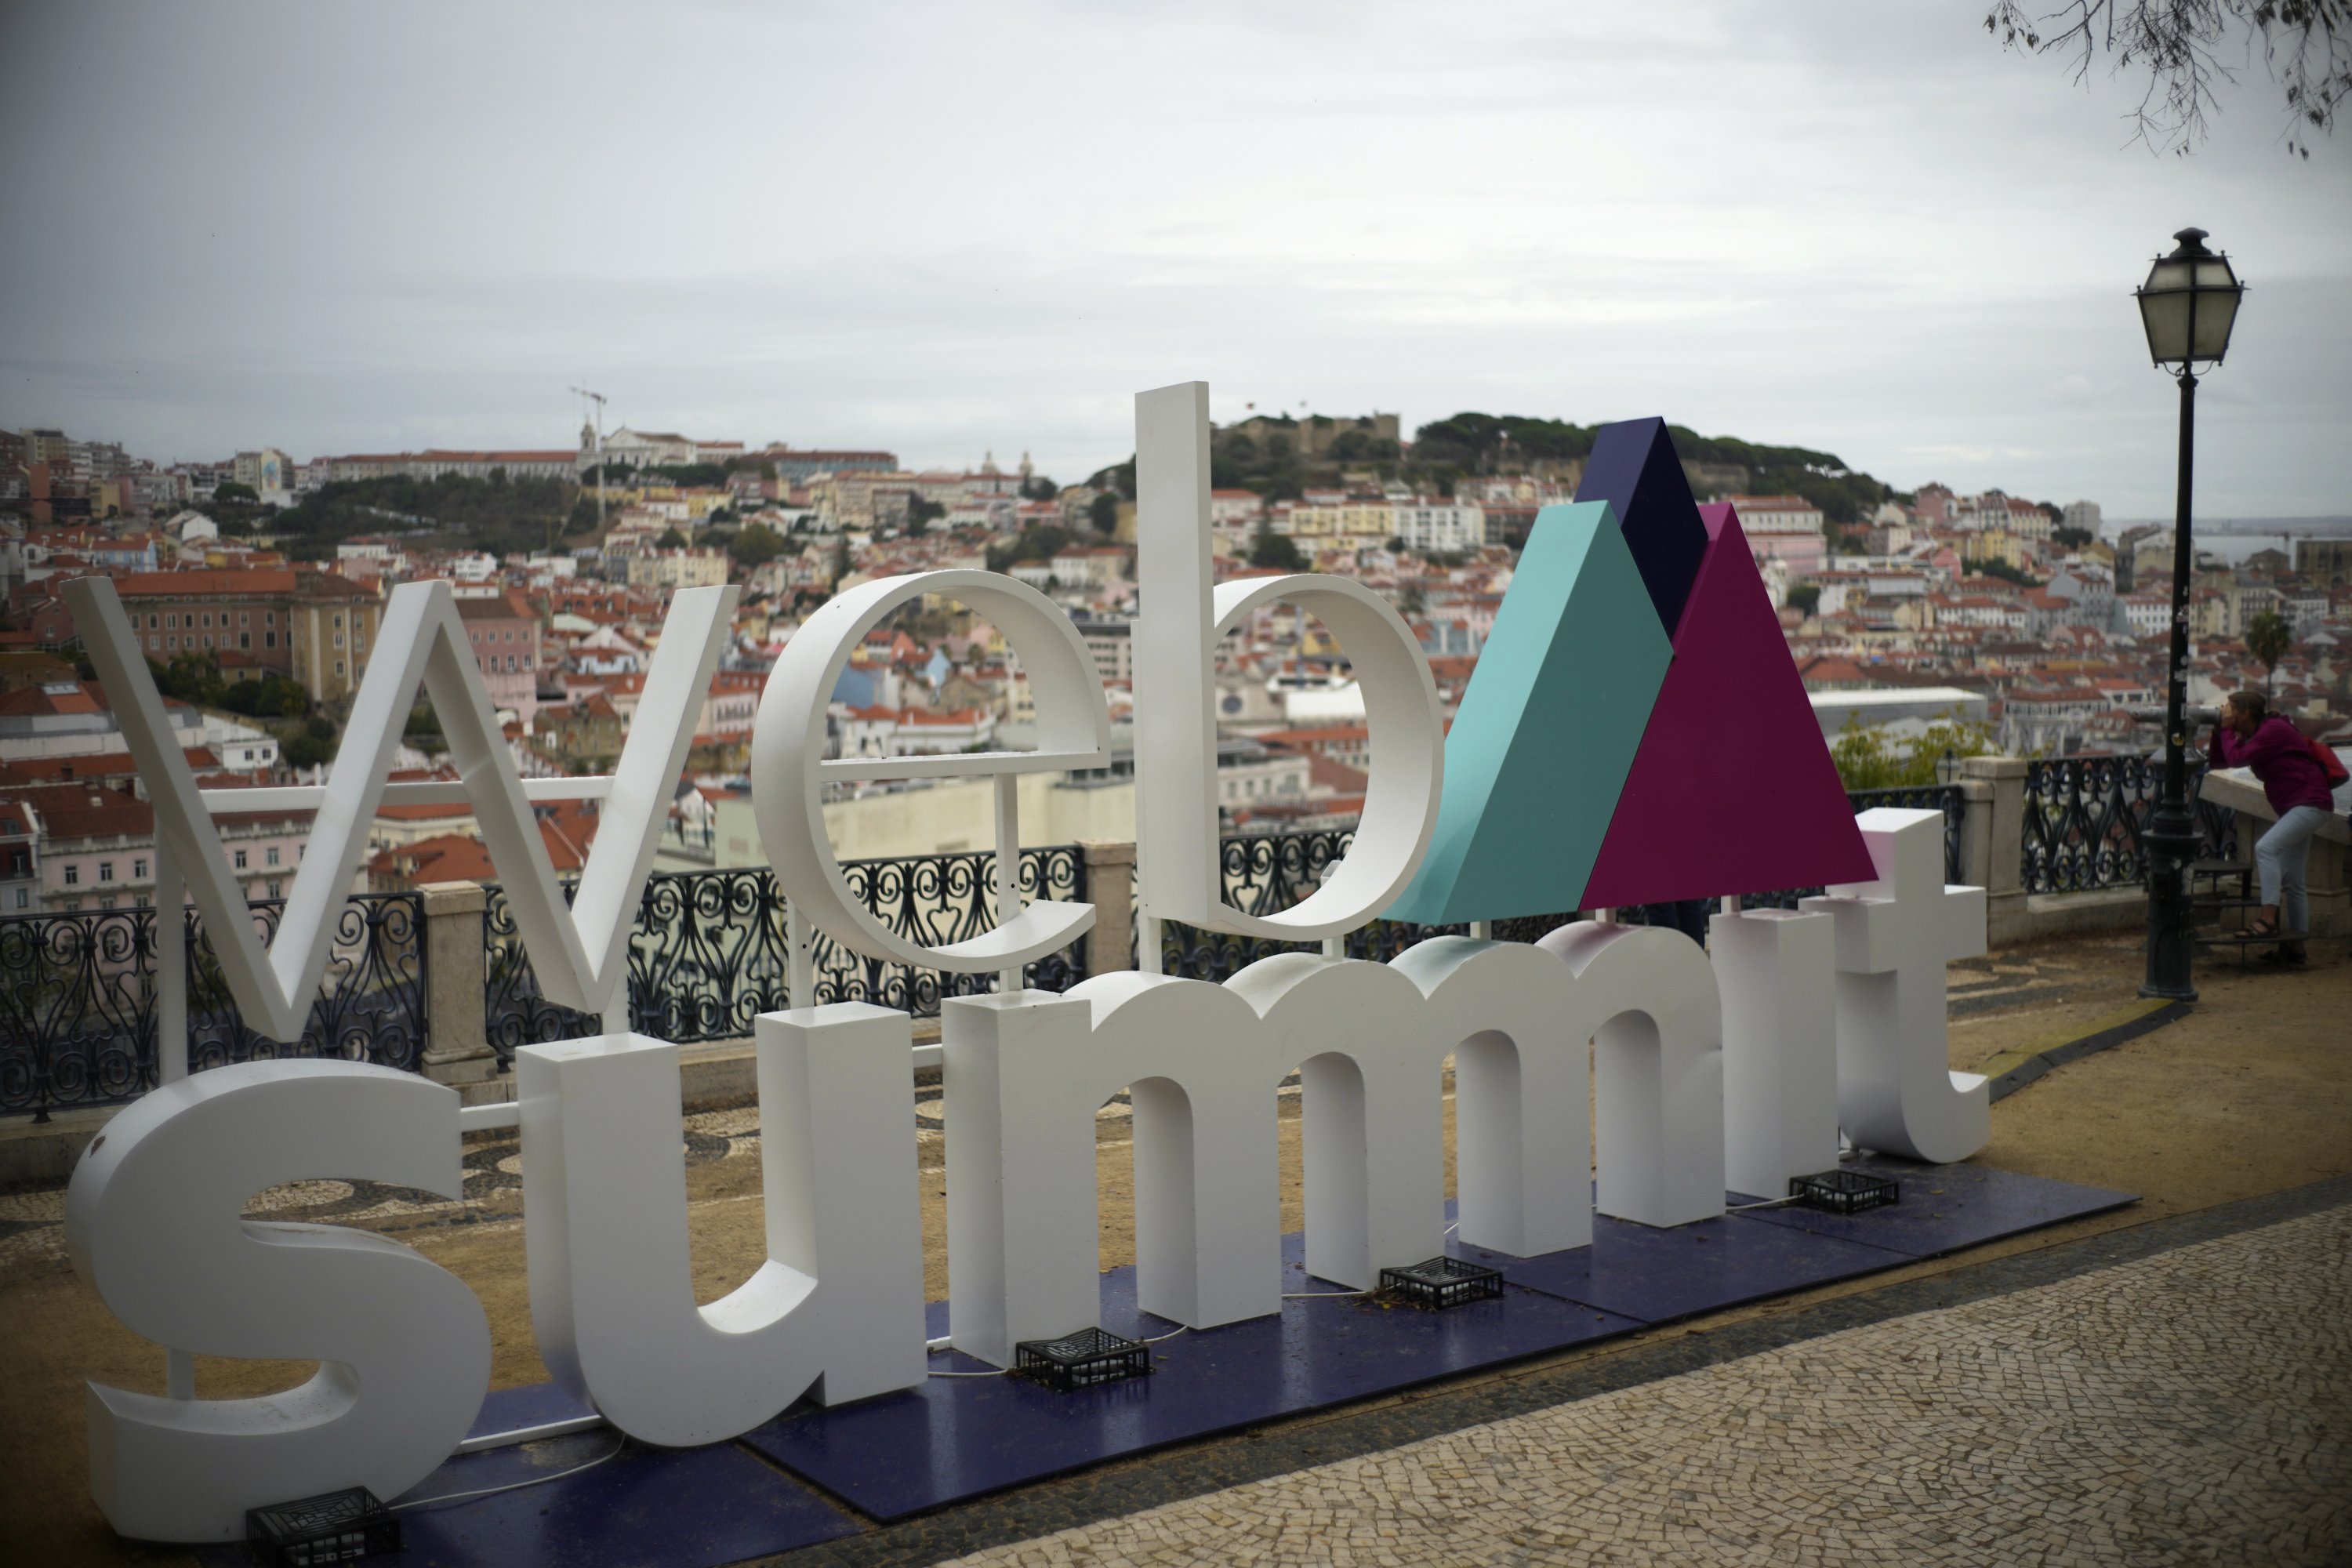 The logo of the Web Summit technology conference is displayed at a viewpoint overlooking downtown Lisbon, Portugal, Oct. 29, 2021. (AP Photo)